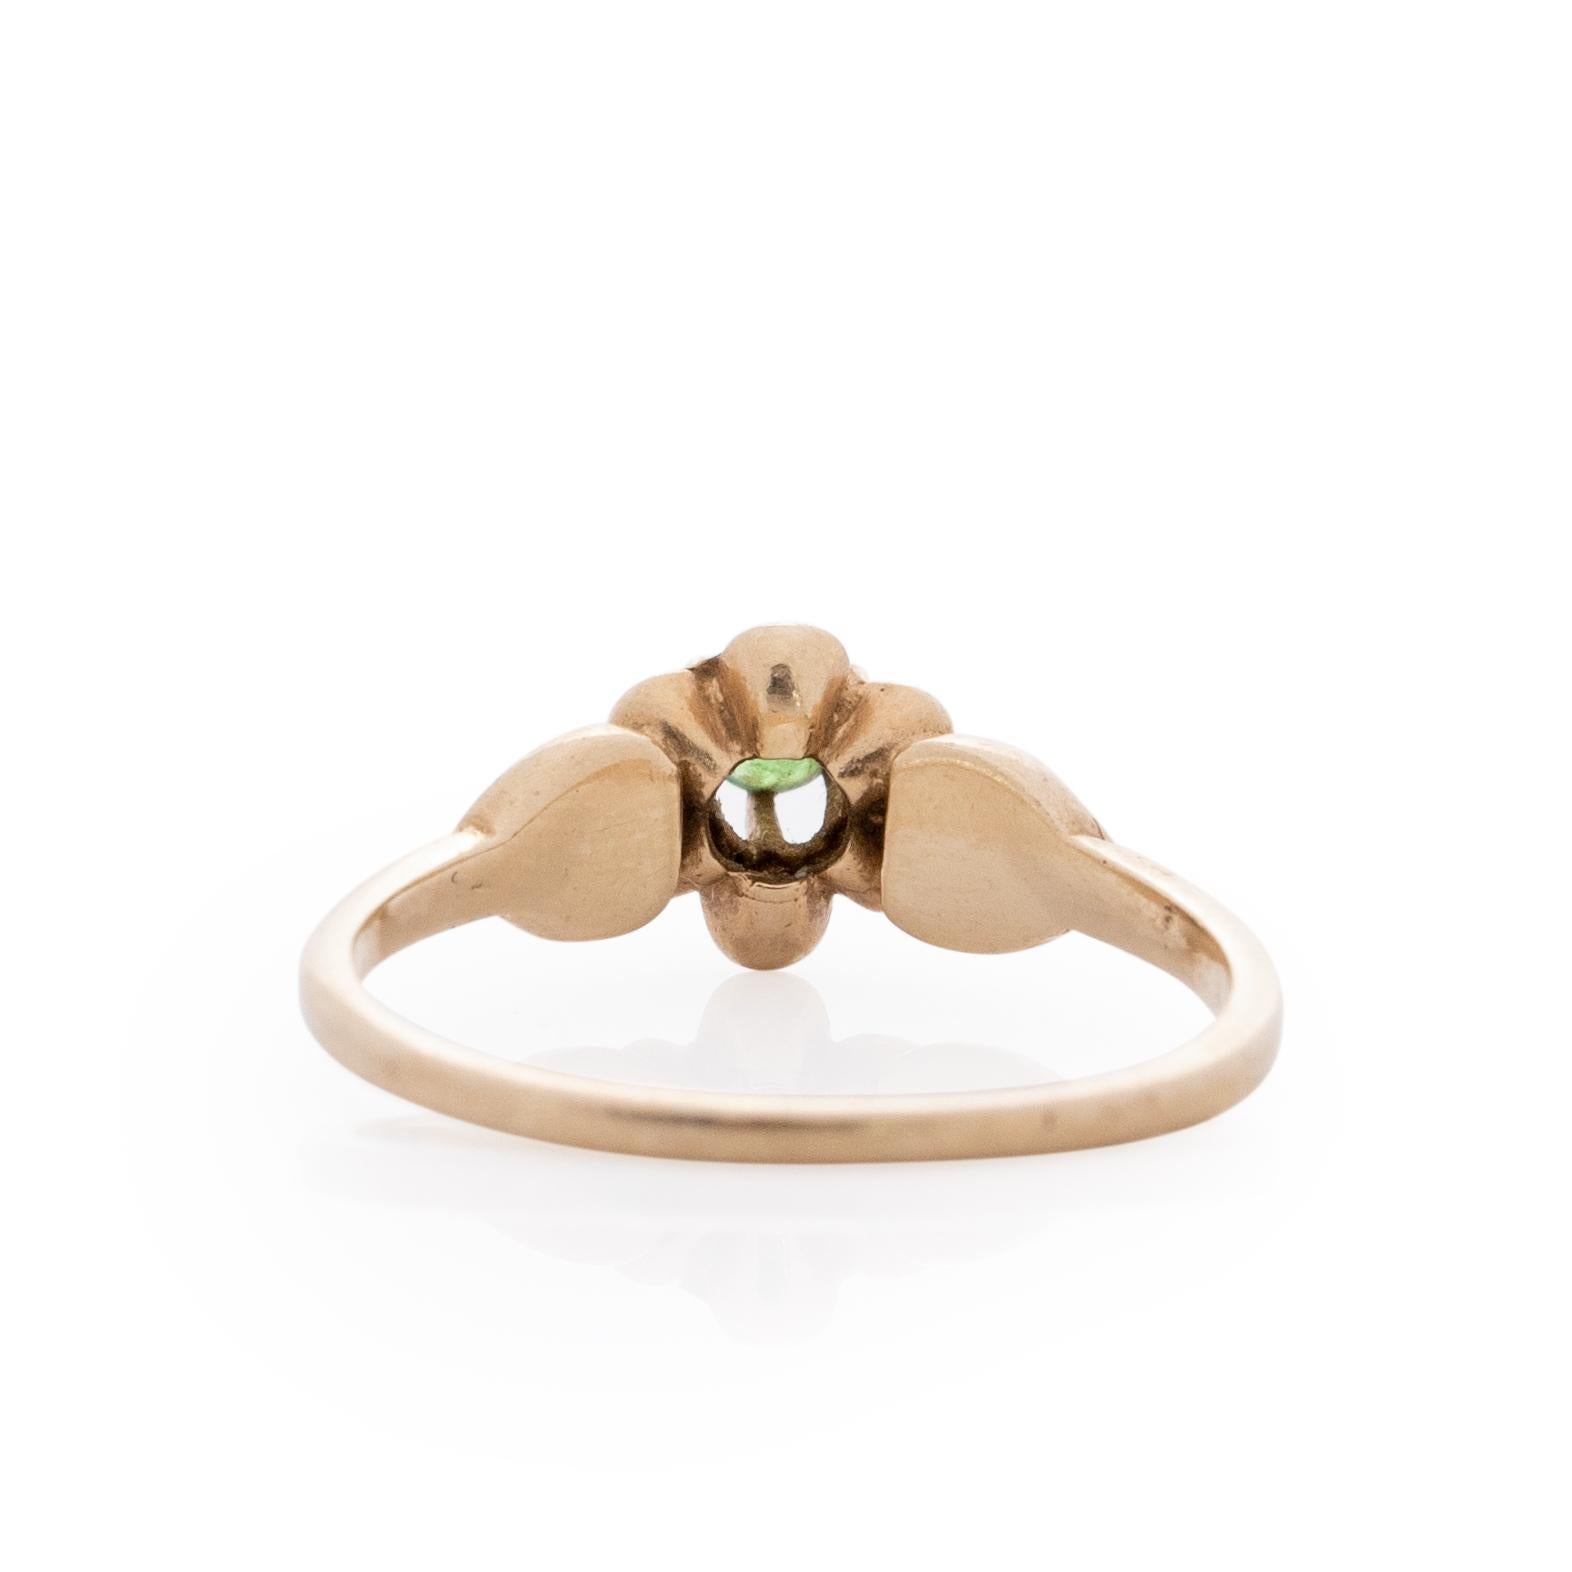 Single Cut Art Deco 14K Yellow Gold Floral Vintage Ring with Leaf Carving and Emerald Ring